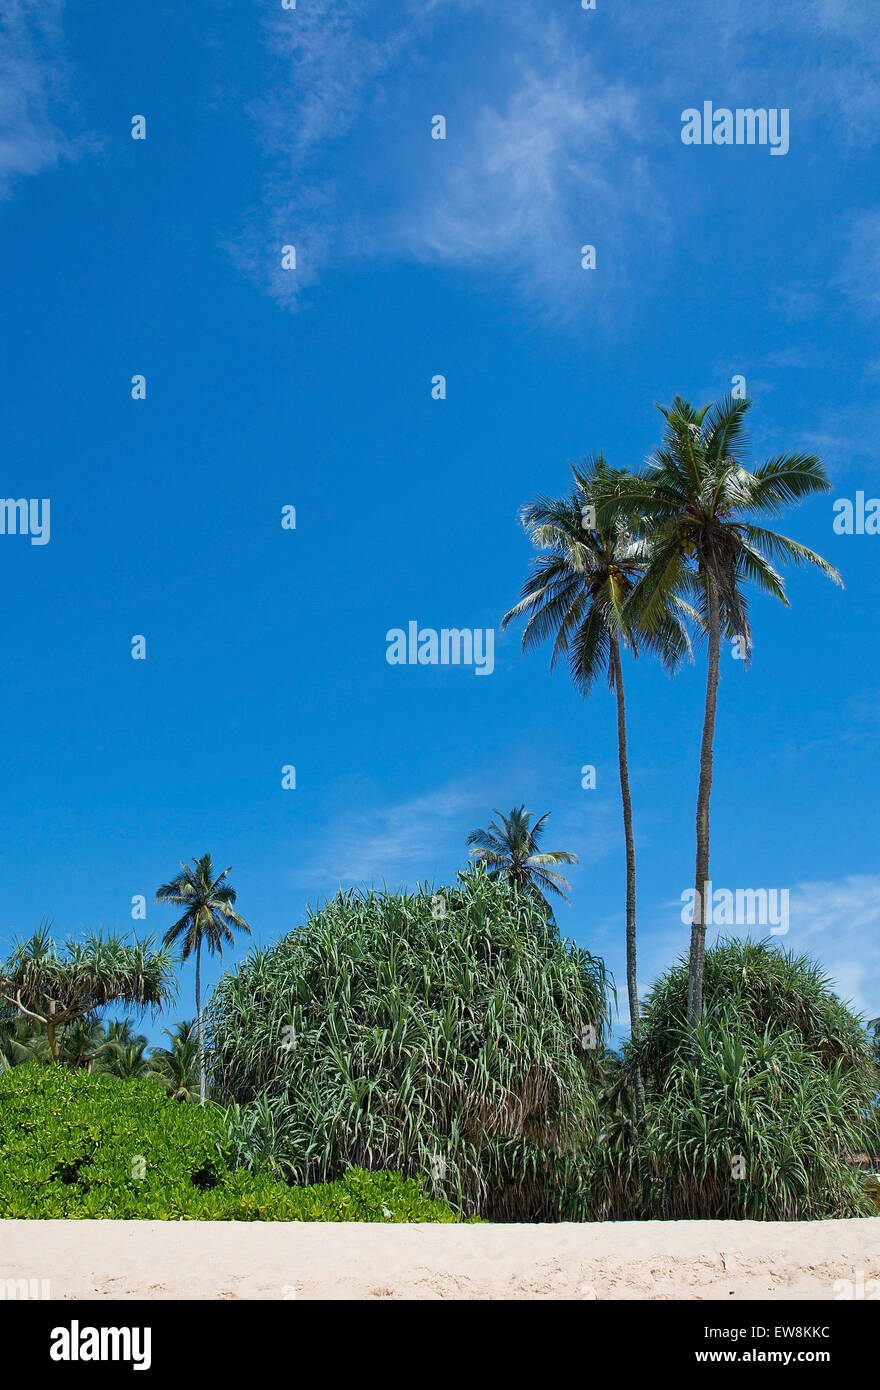 Coconut palm trees and sky on sandy beach frontal view, in remote location, Southern Province, Sri Lanka, Asia. Stock Photo